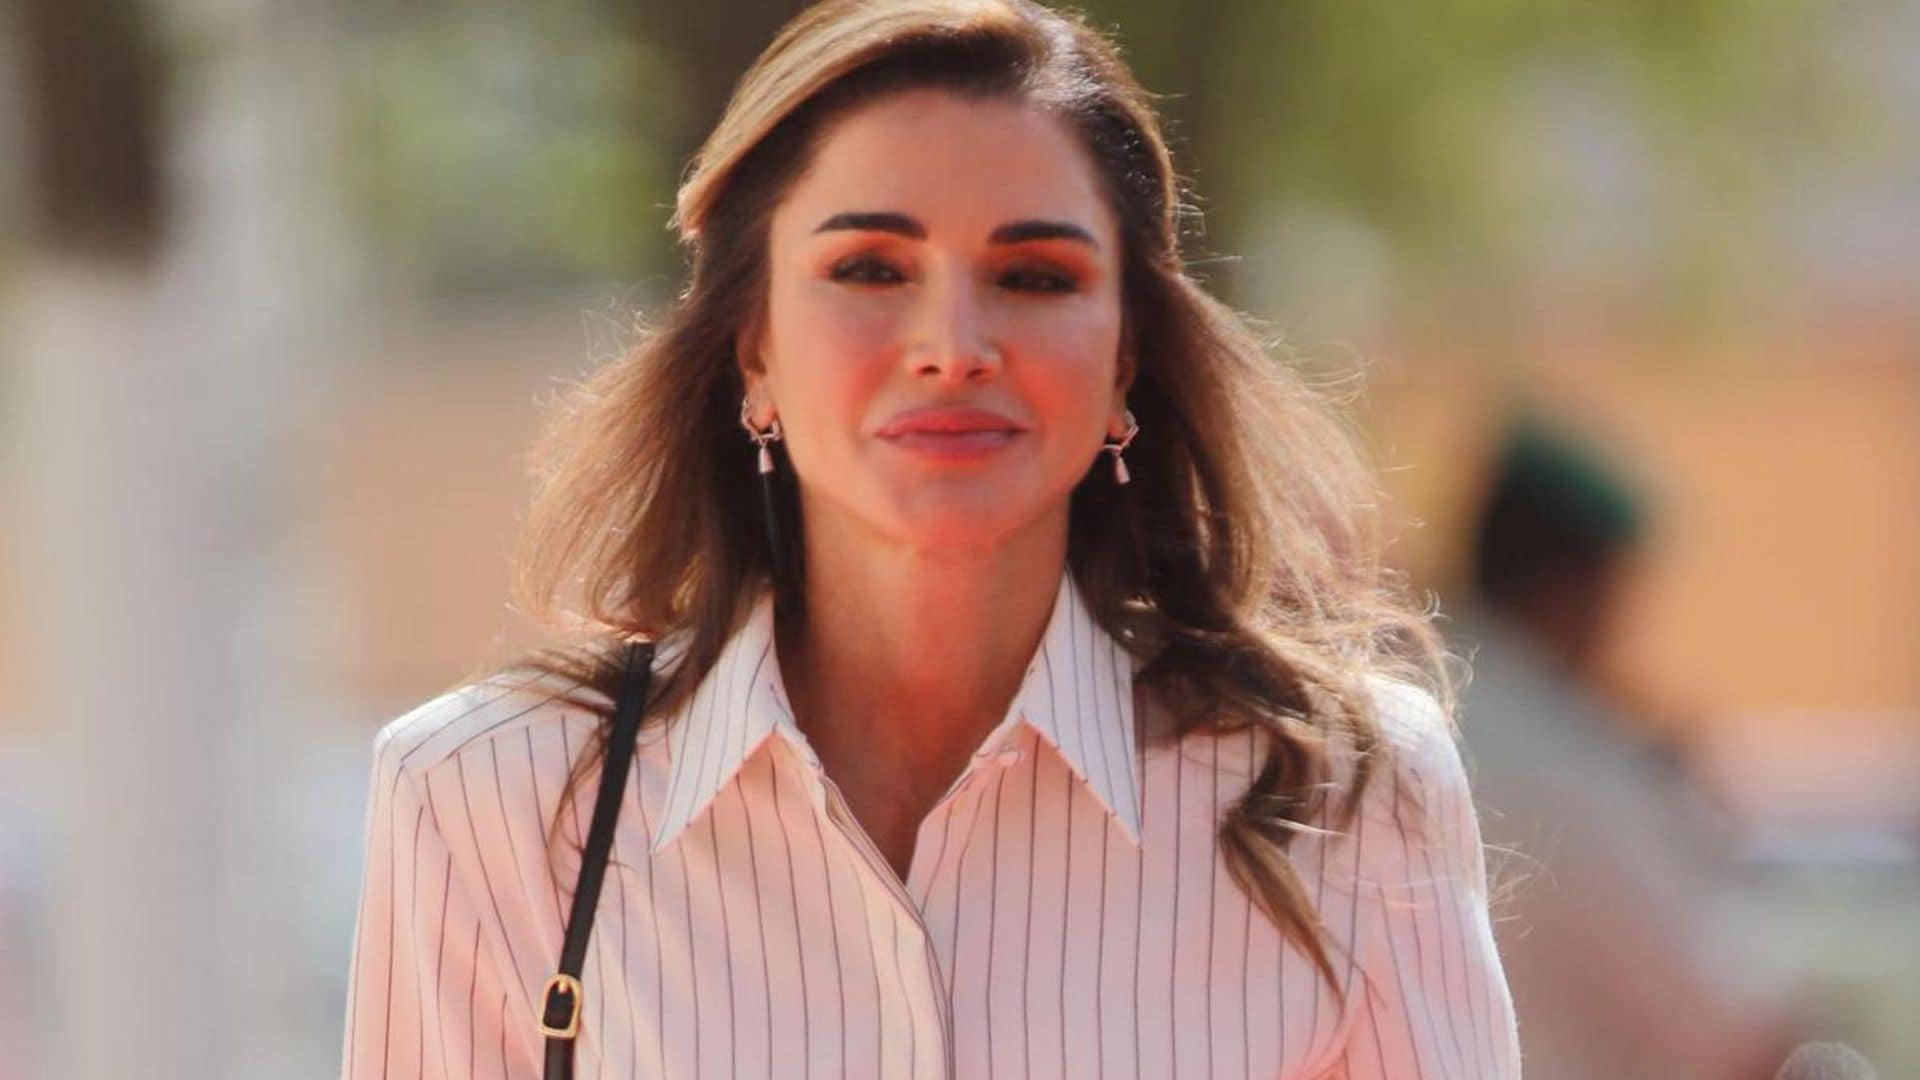 Queen Rania mourns death of family member: ‘There is no remedy for this kind of grief’